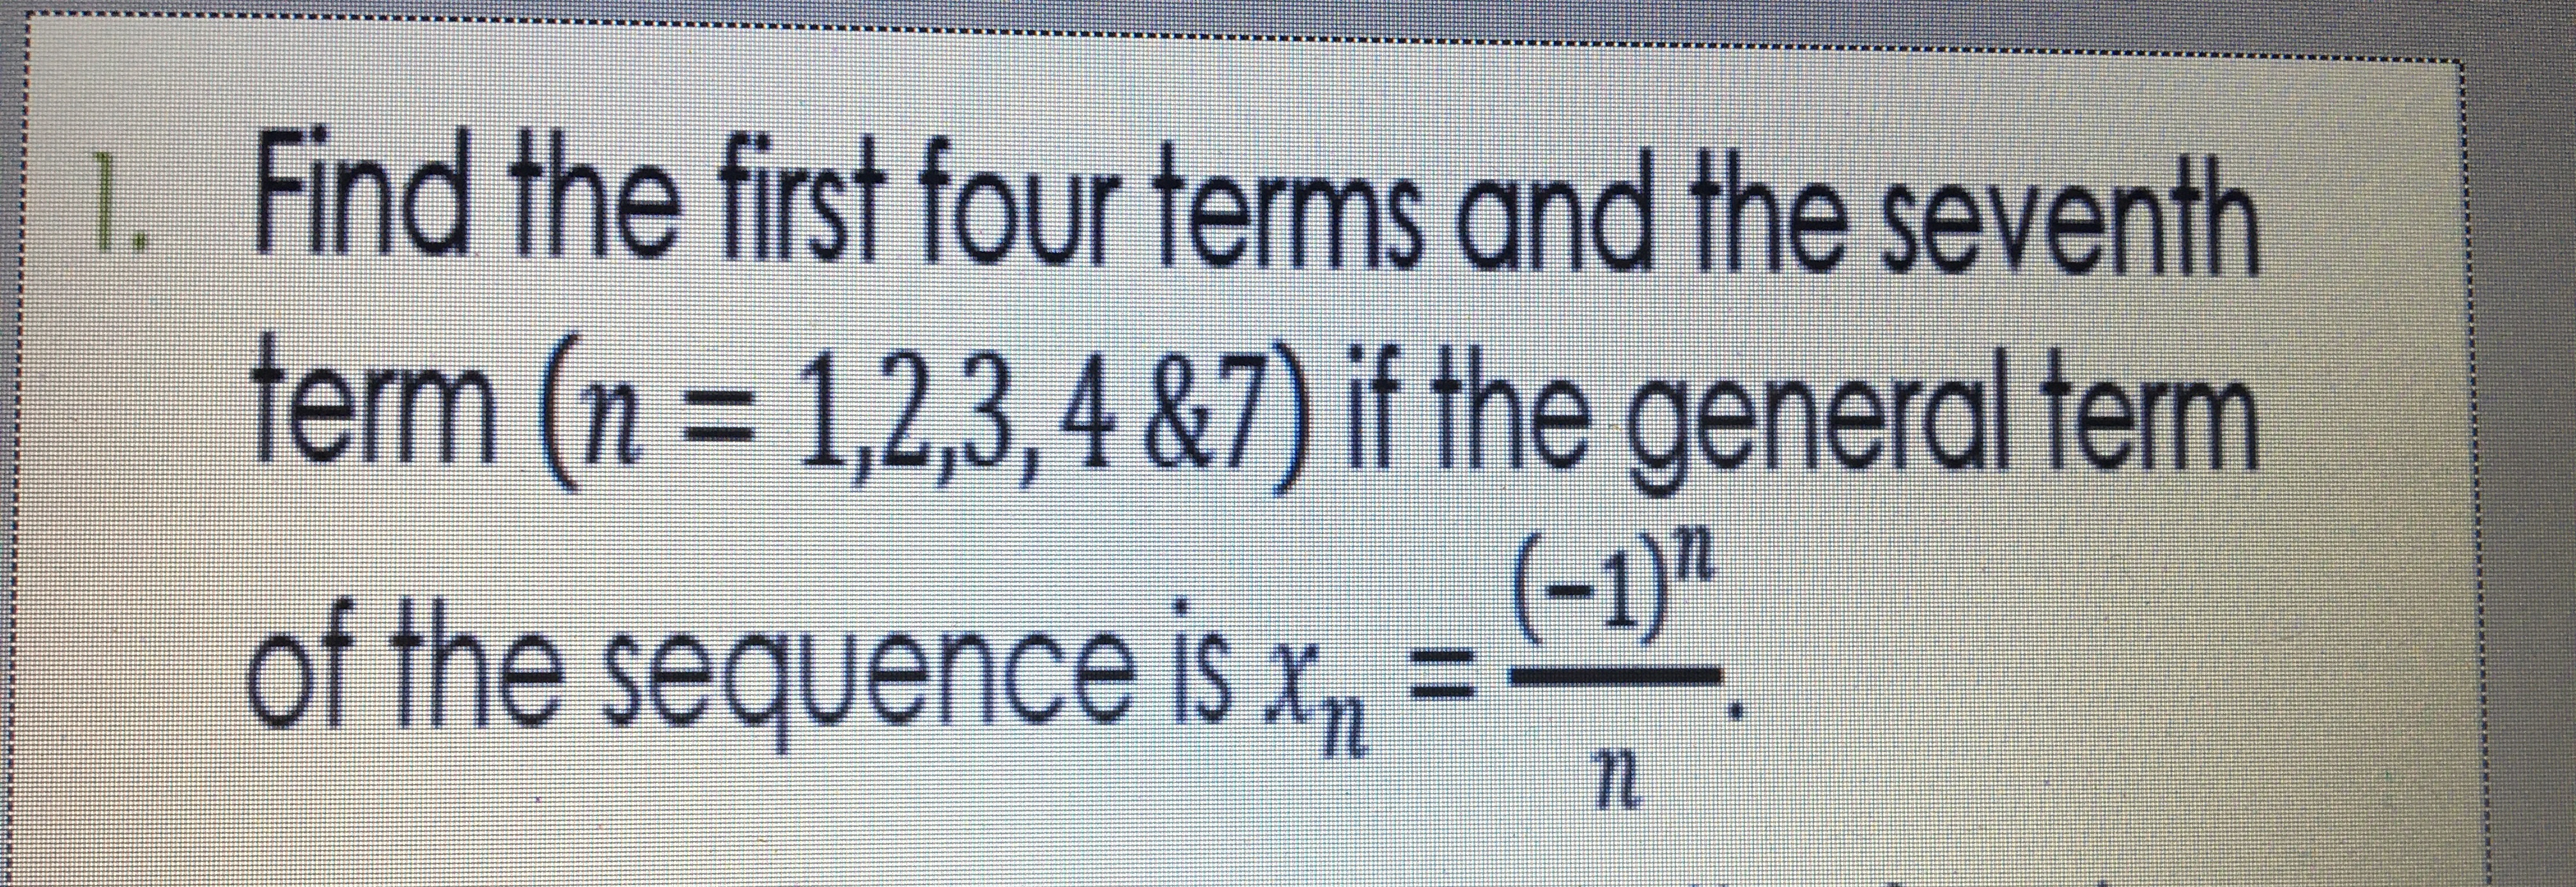 Find the first four terms and the seventh
ferm (n = 1,2,3, 4 &7) if the general ferm
(-1)"
of the sequence is Xy
